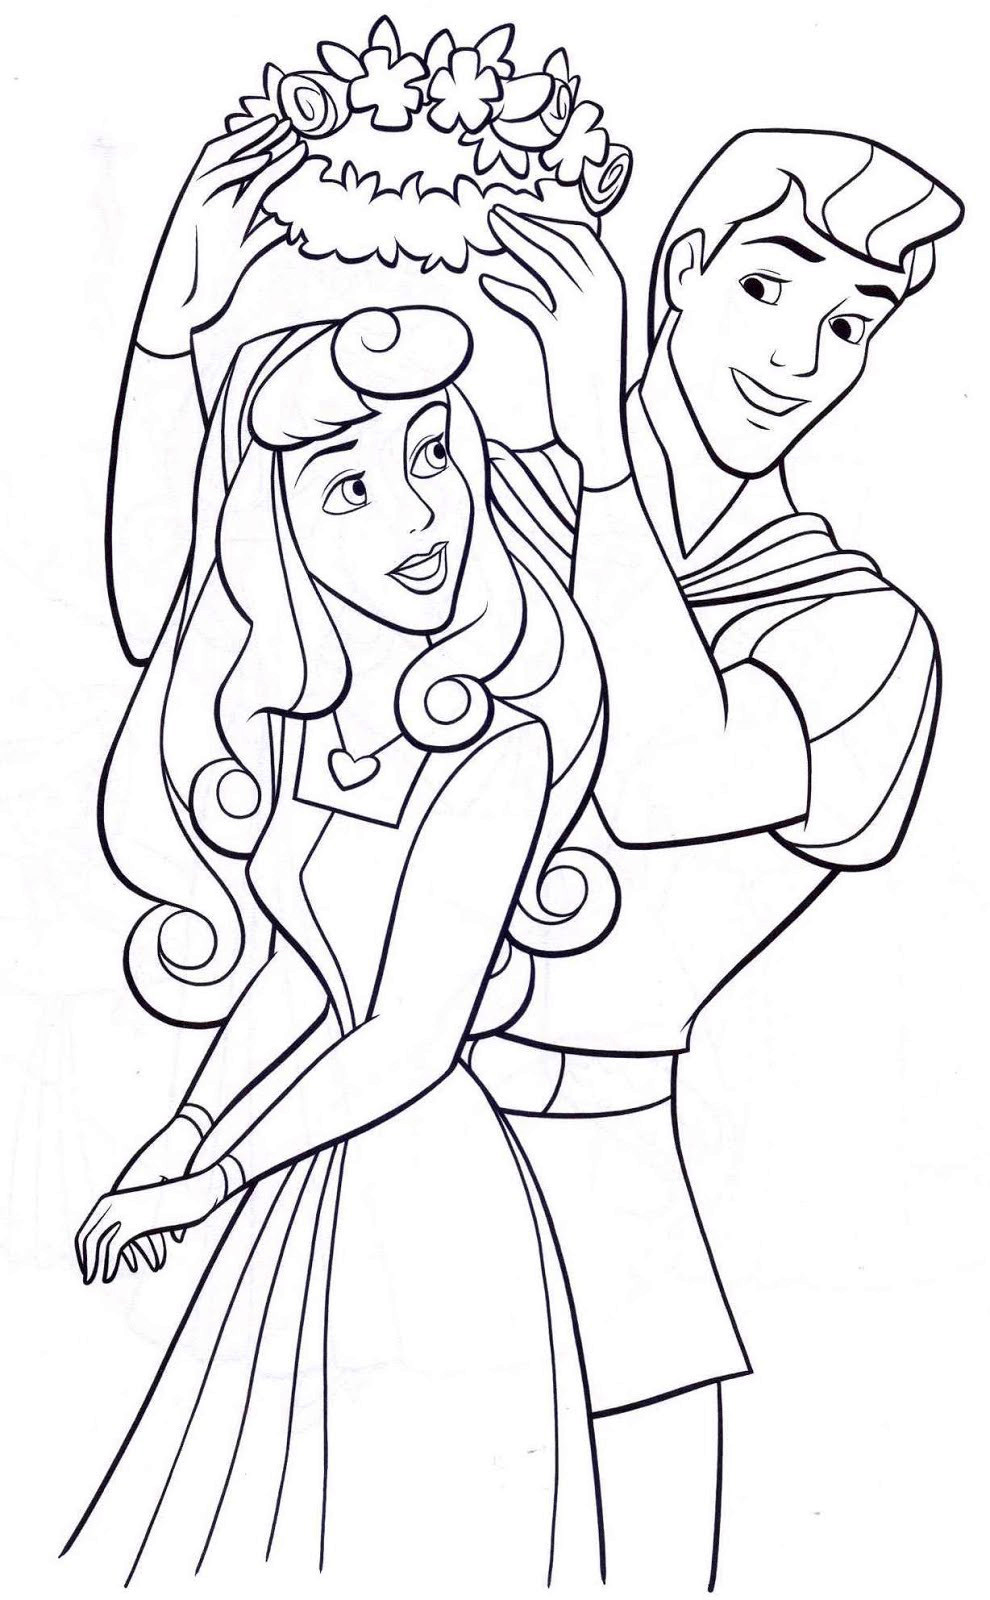 Disney Princess Coloring Pages For Kids
 Princess Coloring Pages Best Coloring Pages For Kids